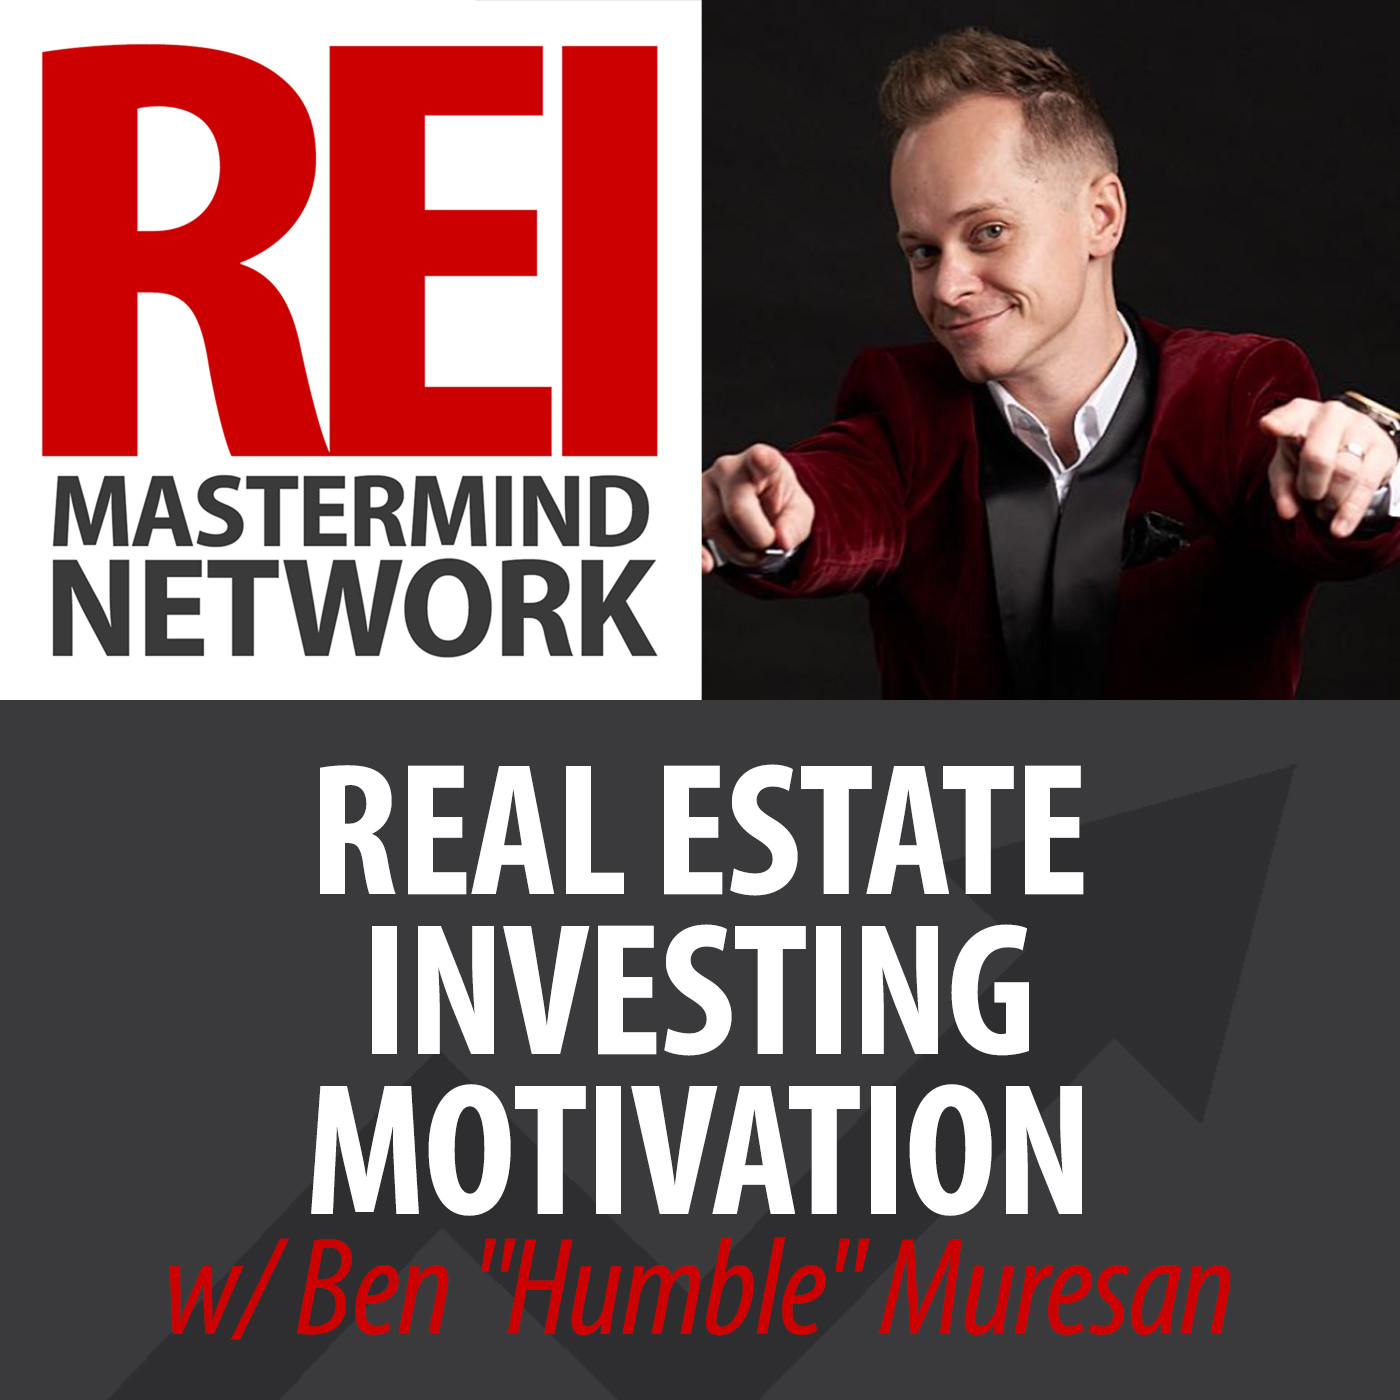 Real Estate Investing Motivation with Ben "Humble" Muresan Image